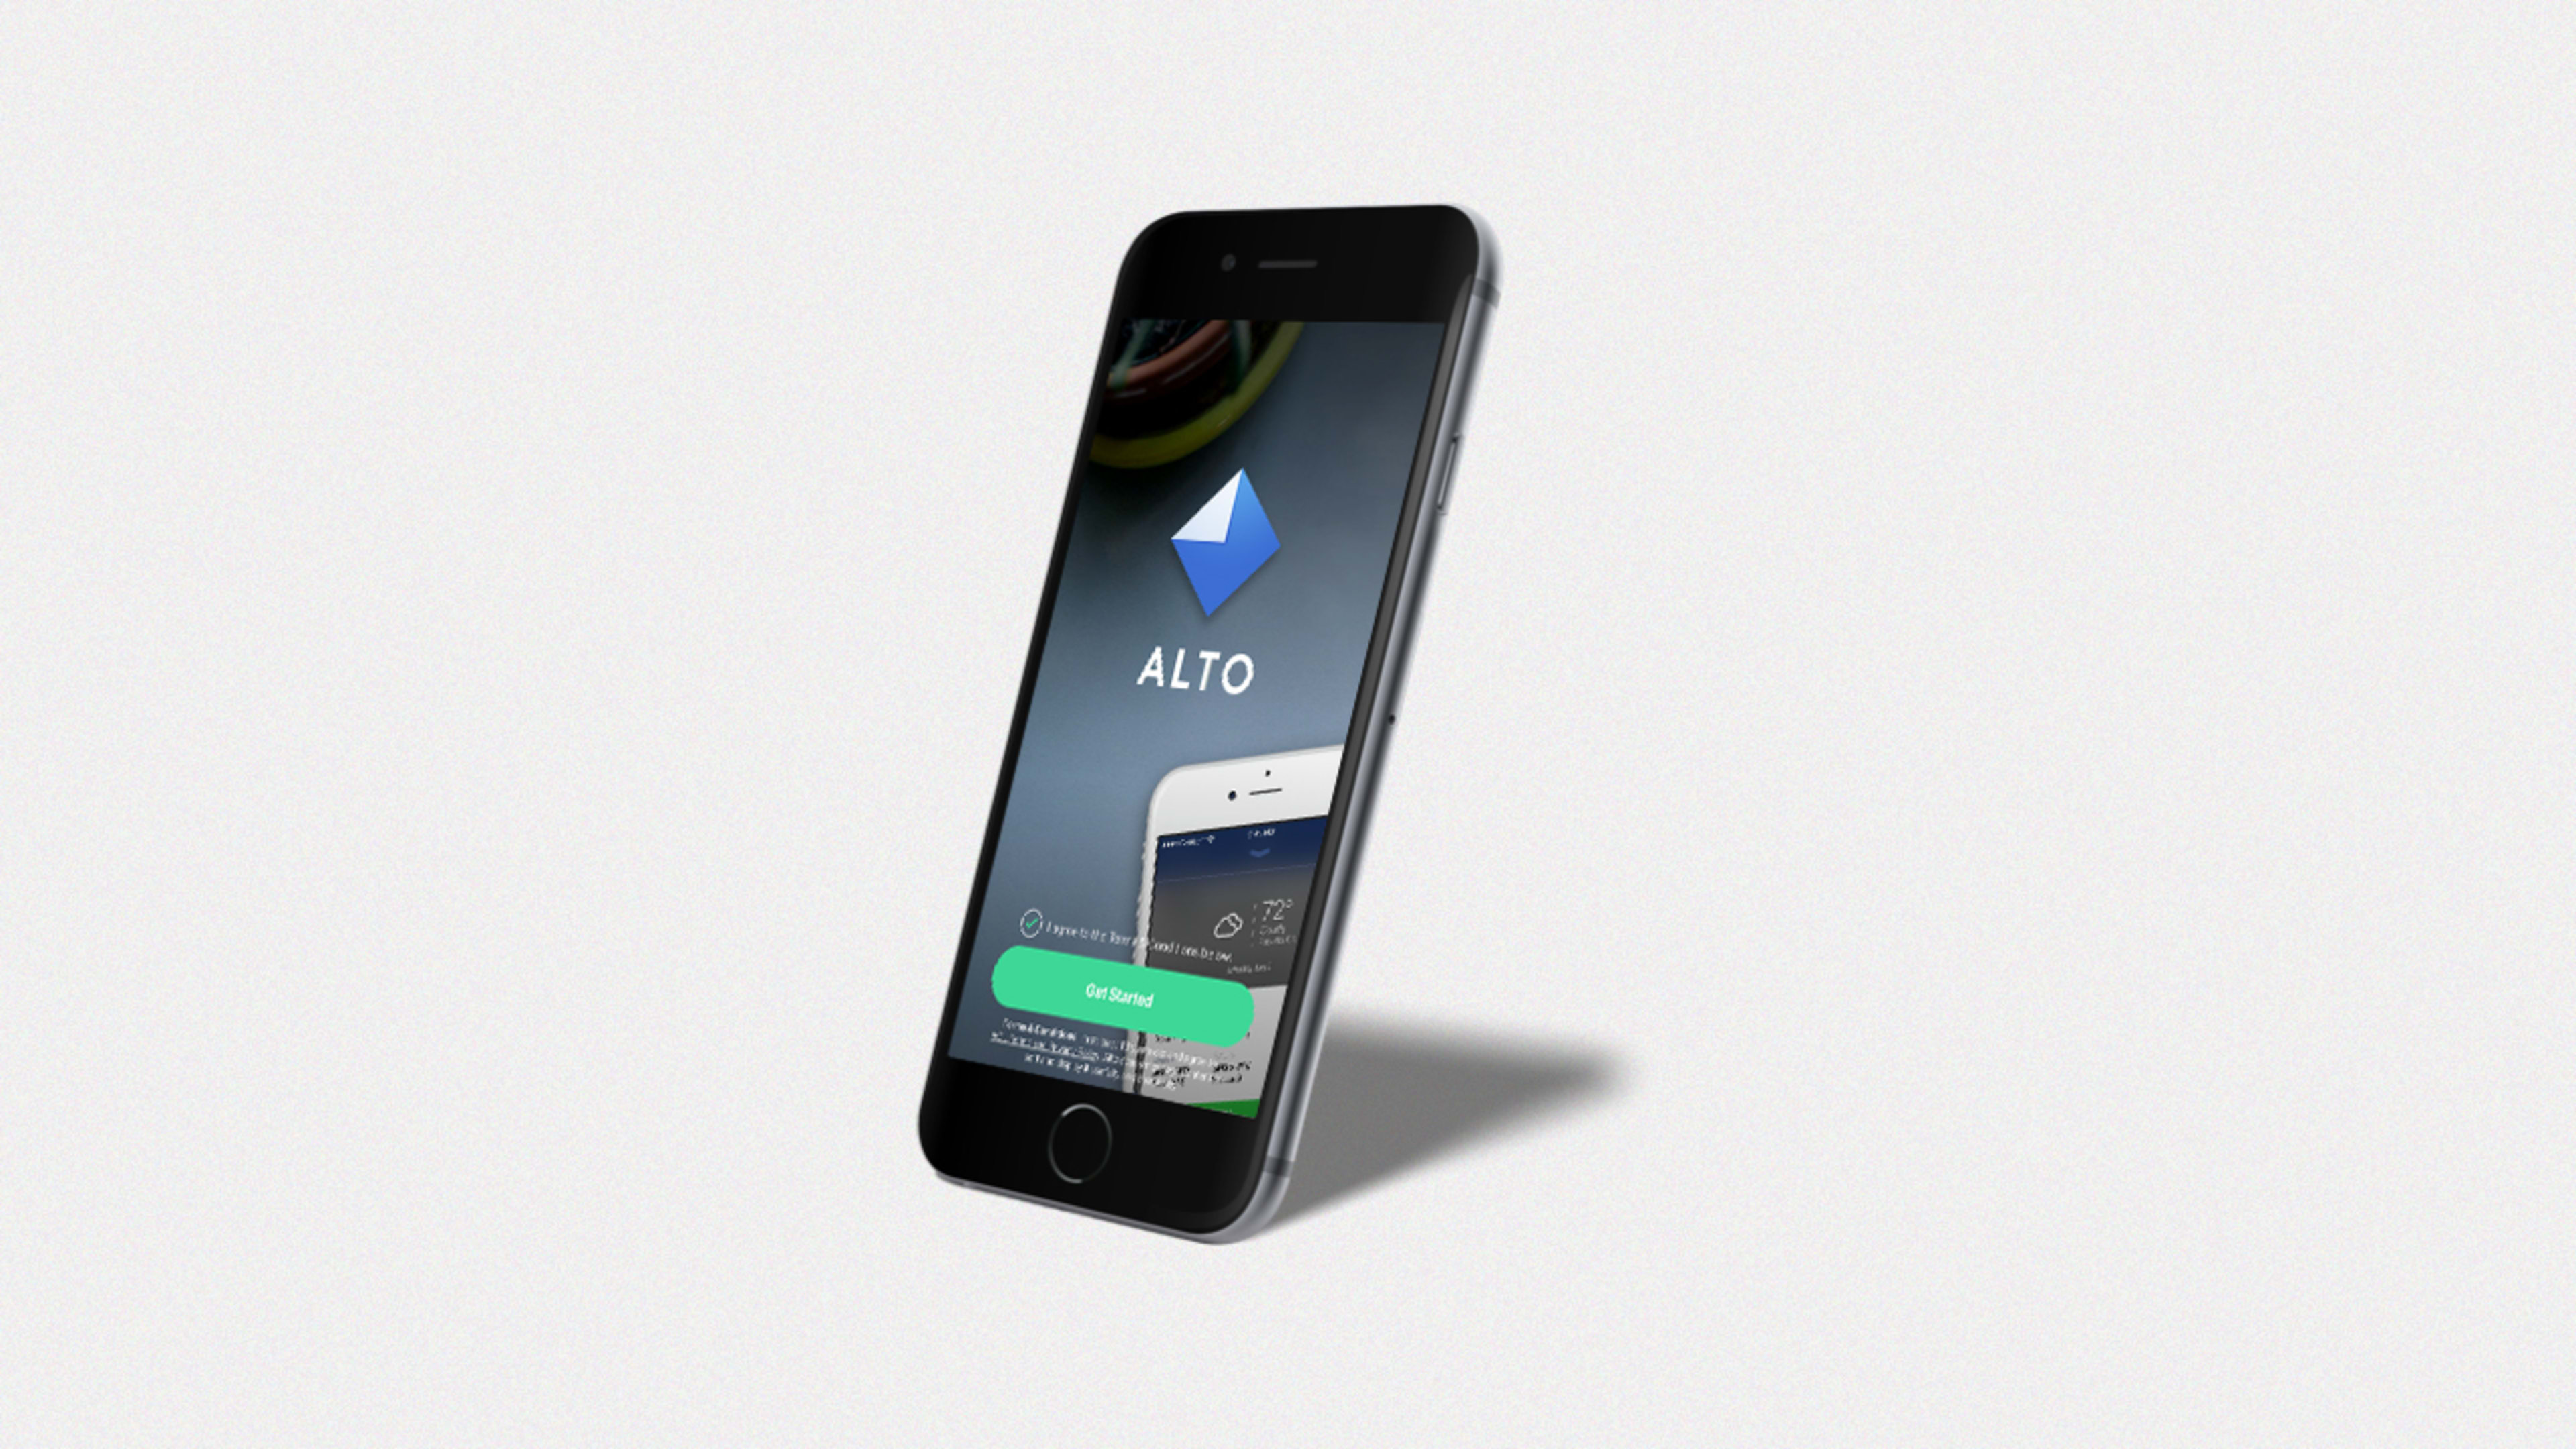 AOL’s Innovative Card-Based Email Service, Alto, Comes To iOS And Android